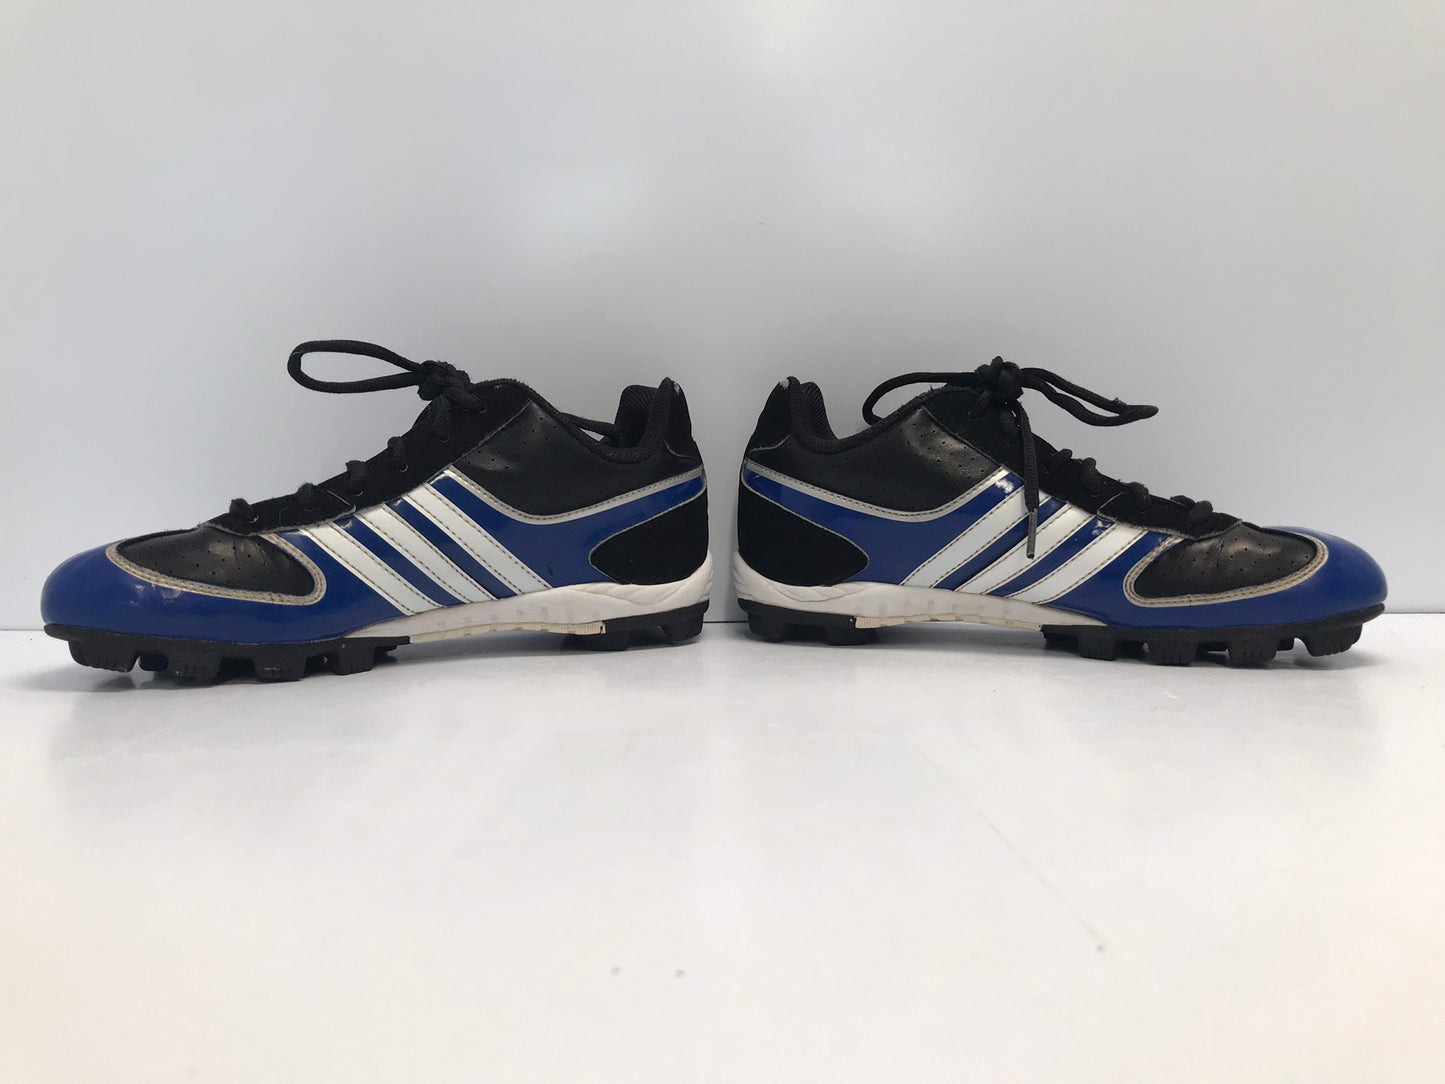 Baseball Shoes Cleats Child Size 5 Adidas Blue Black Excellent